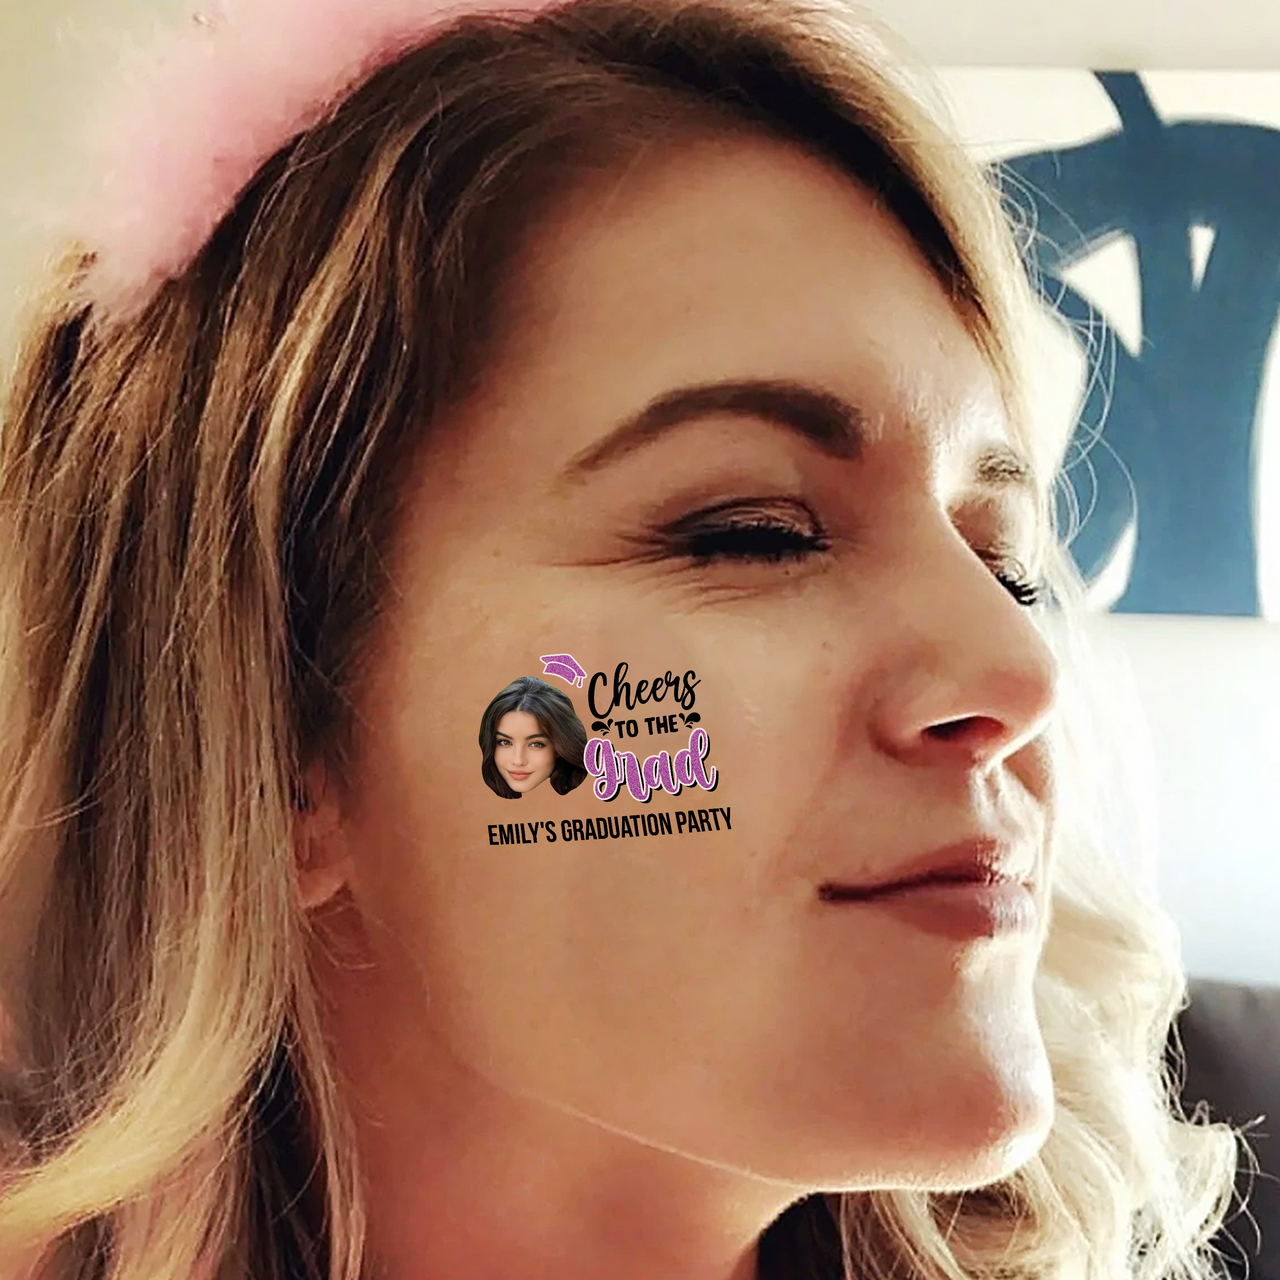 Personalized Graduation Party Face Photo Temporary Tattoos, Cheer to Our Graduate FC